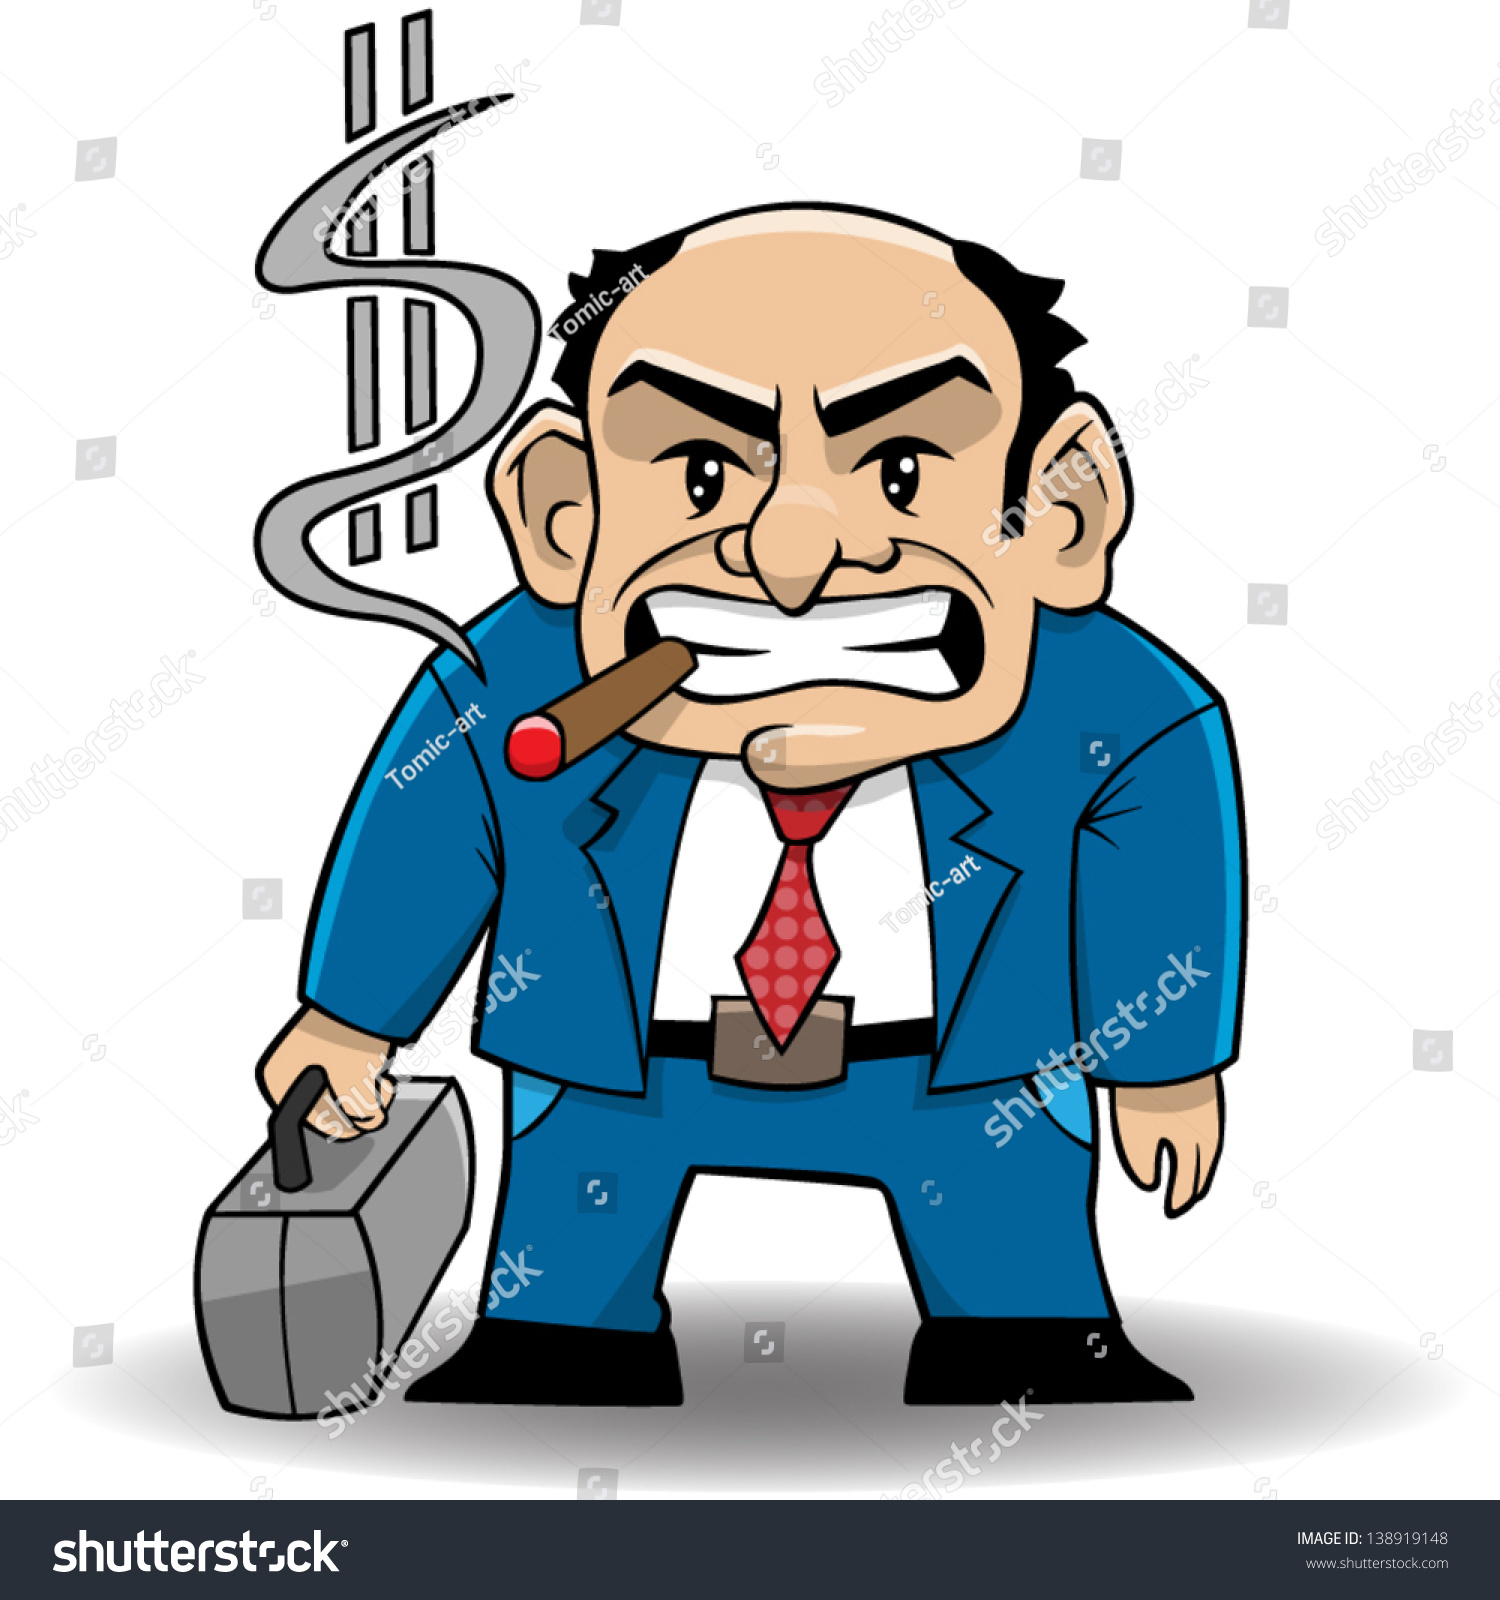 clipart banker - photo #13